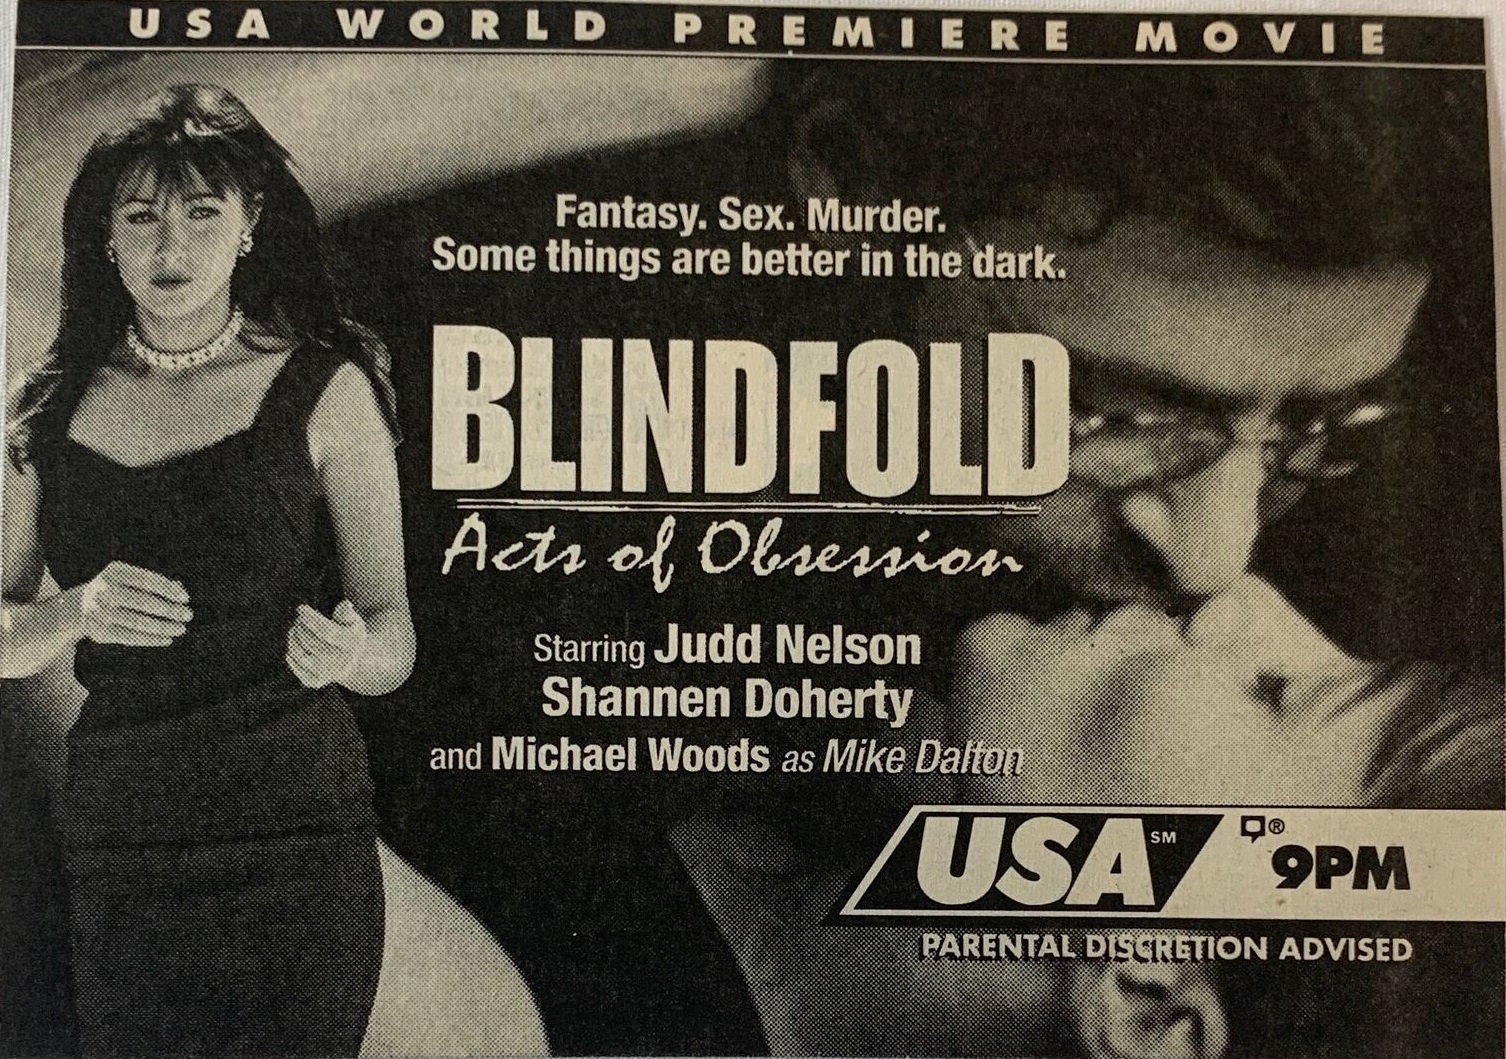 blindfold acts of obsession